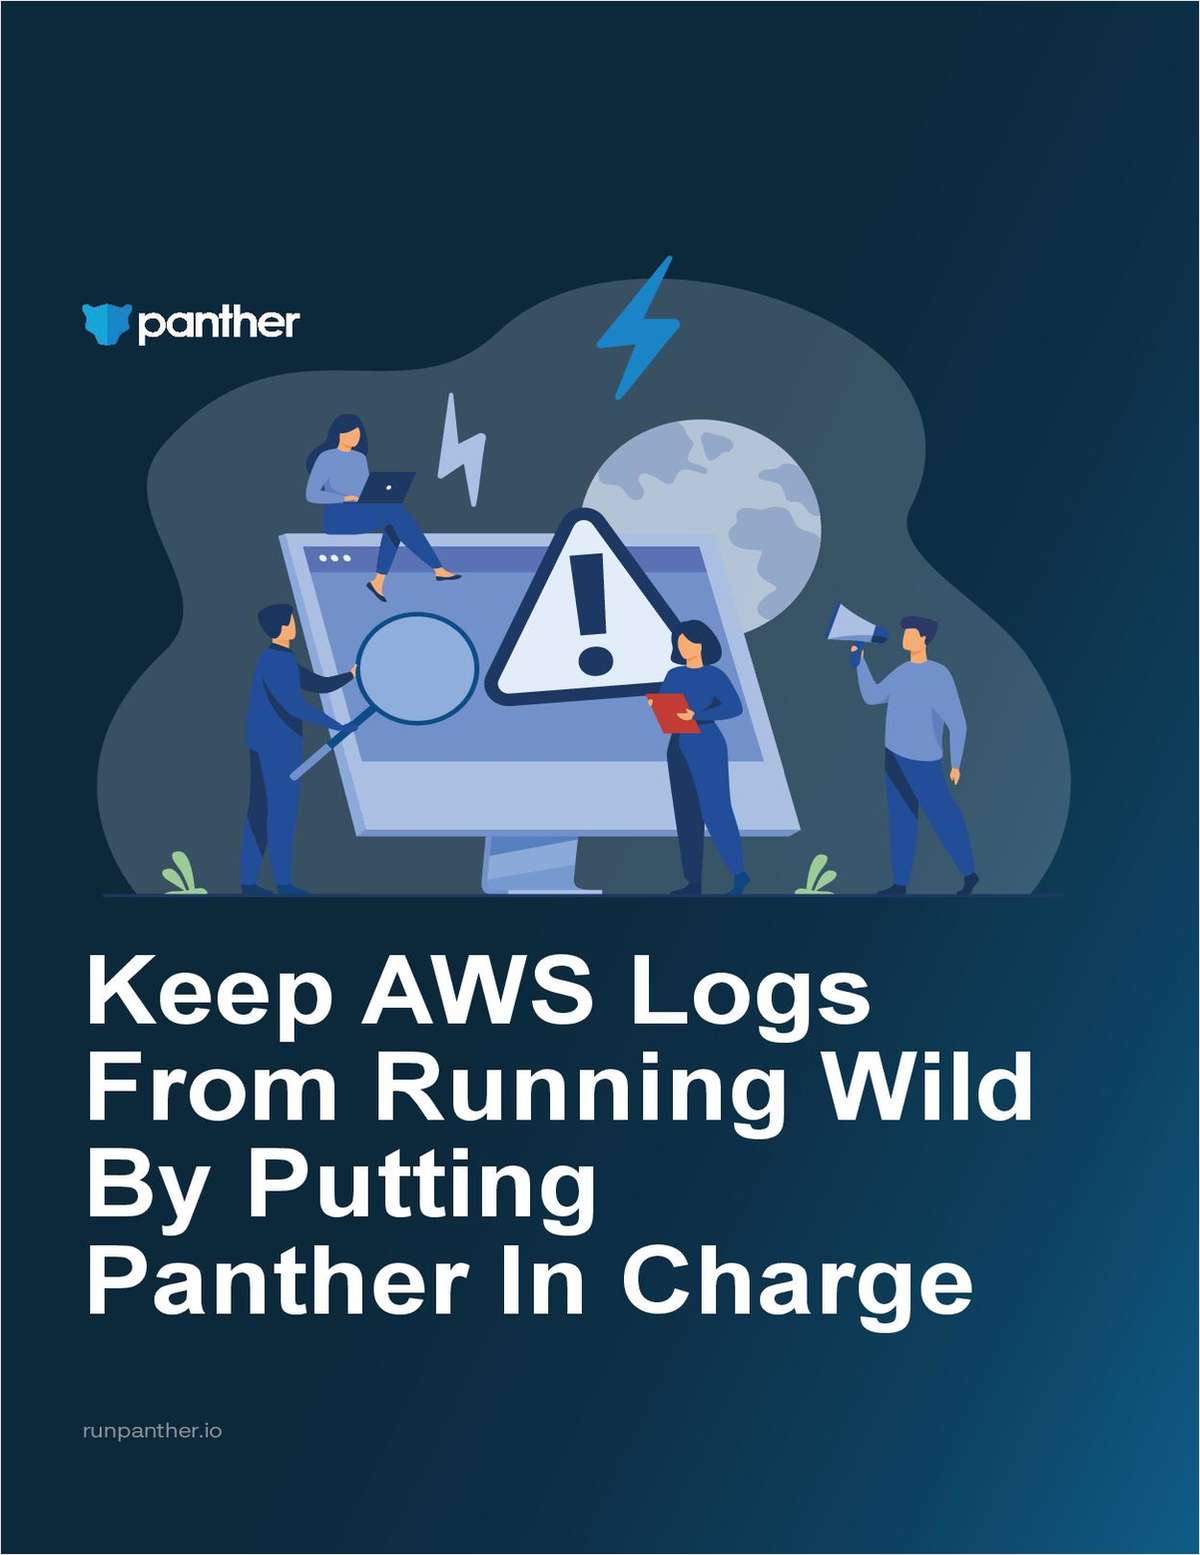 Keep AWS Logs From Running Wild By Putting Panther In Charge